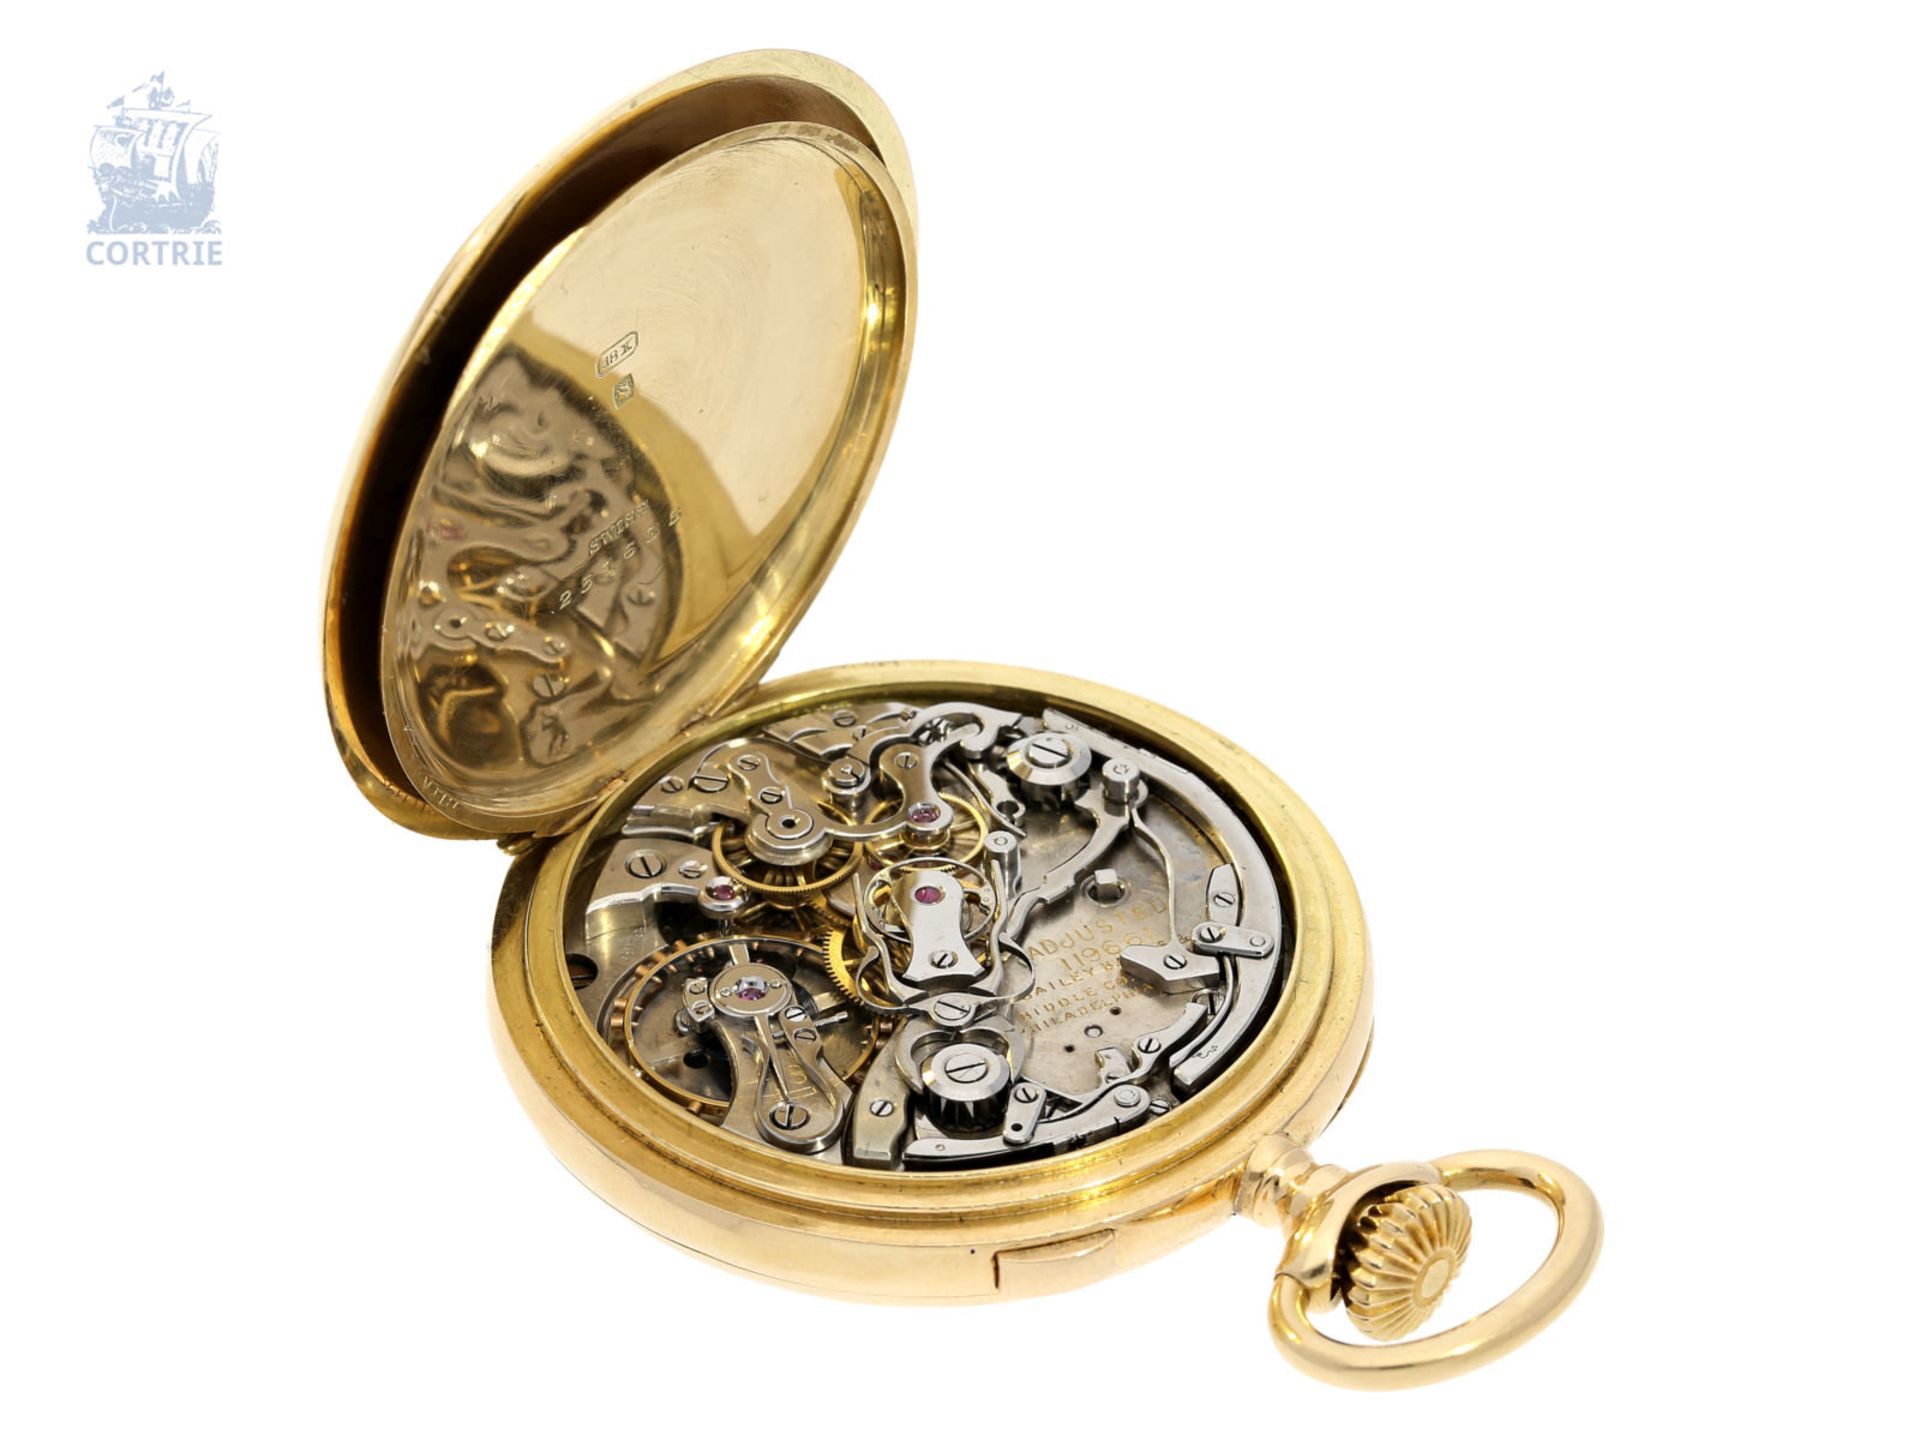 Pocket watch: very fine, small chronograph Rattrapante, gold/enamel case, Bailey, Banks & Biddle, no - Image 5 of 7